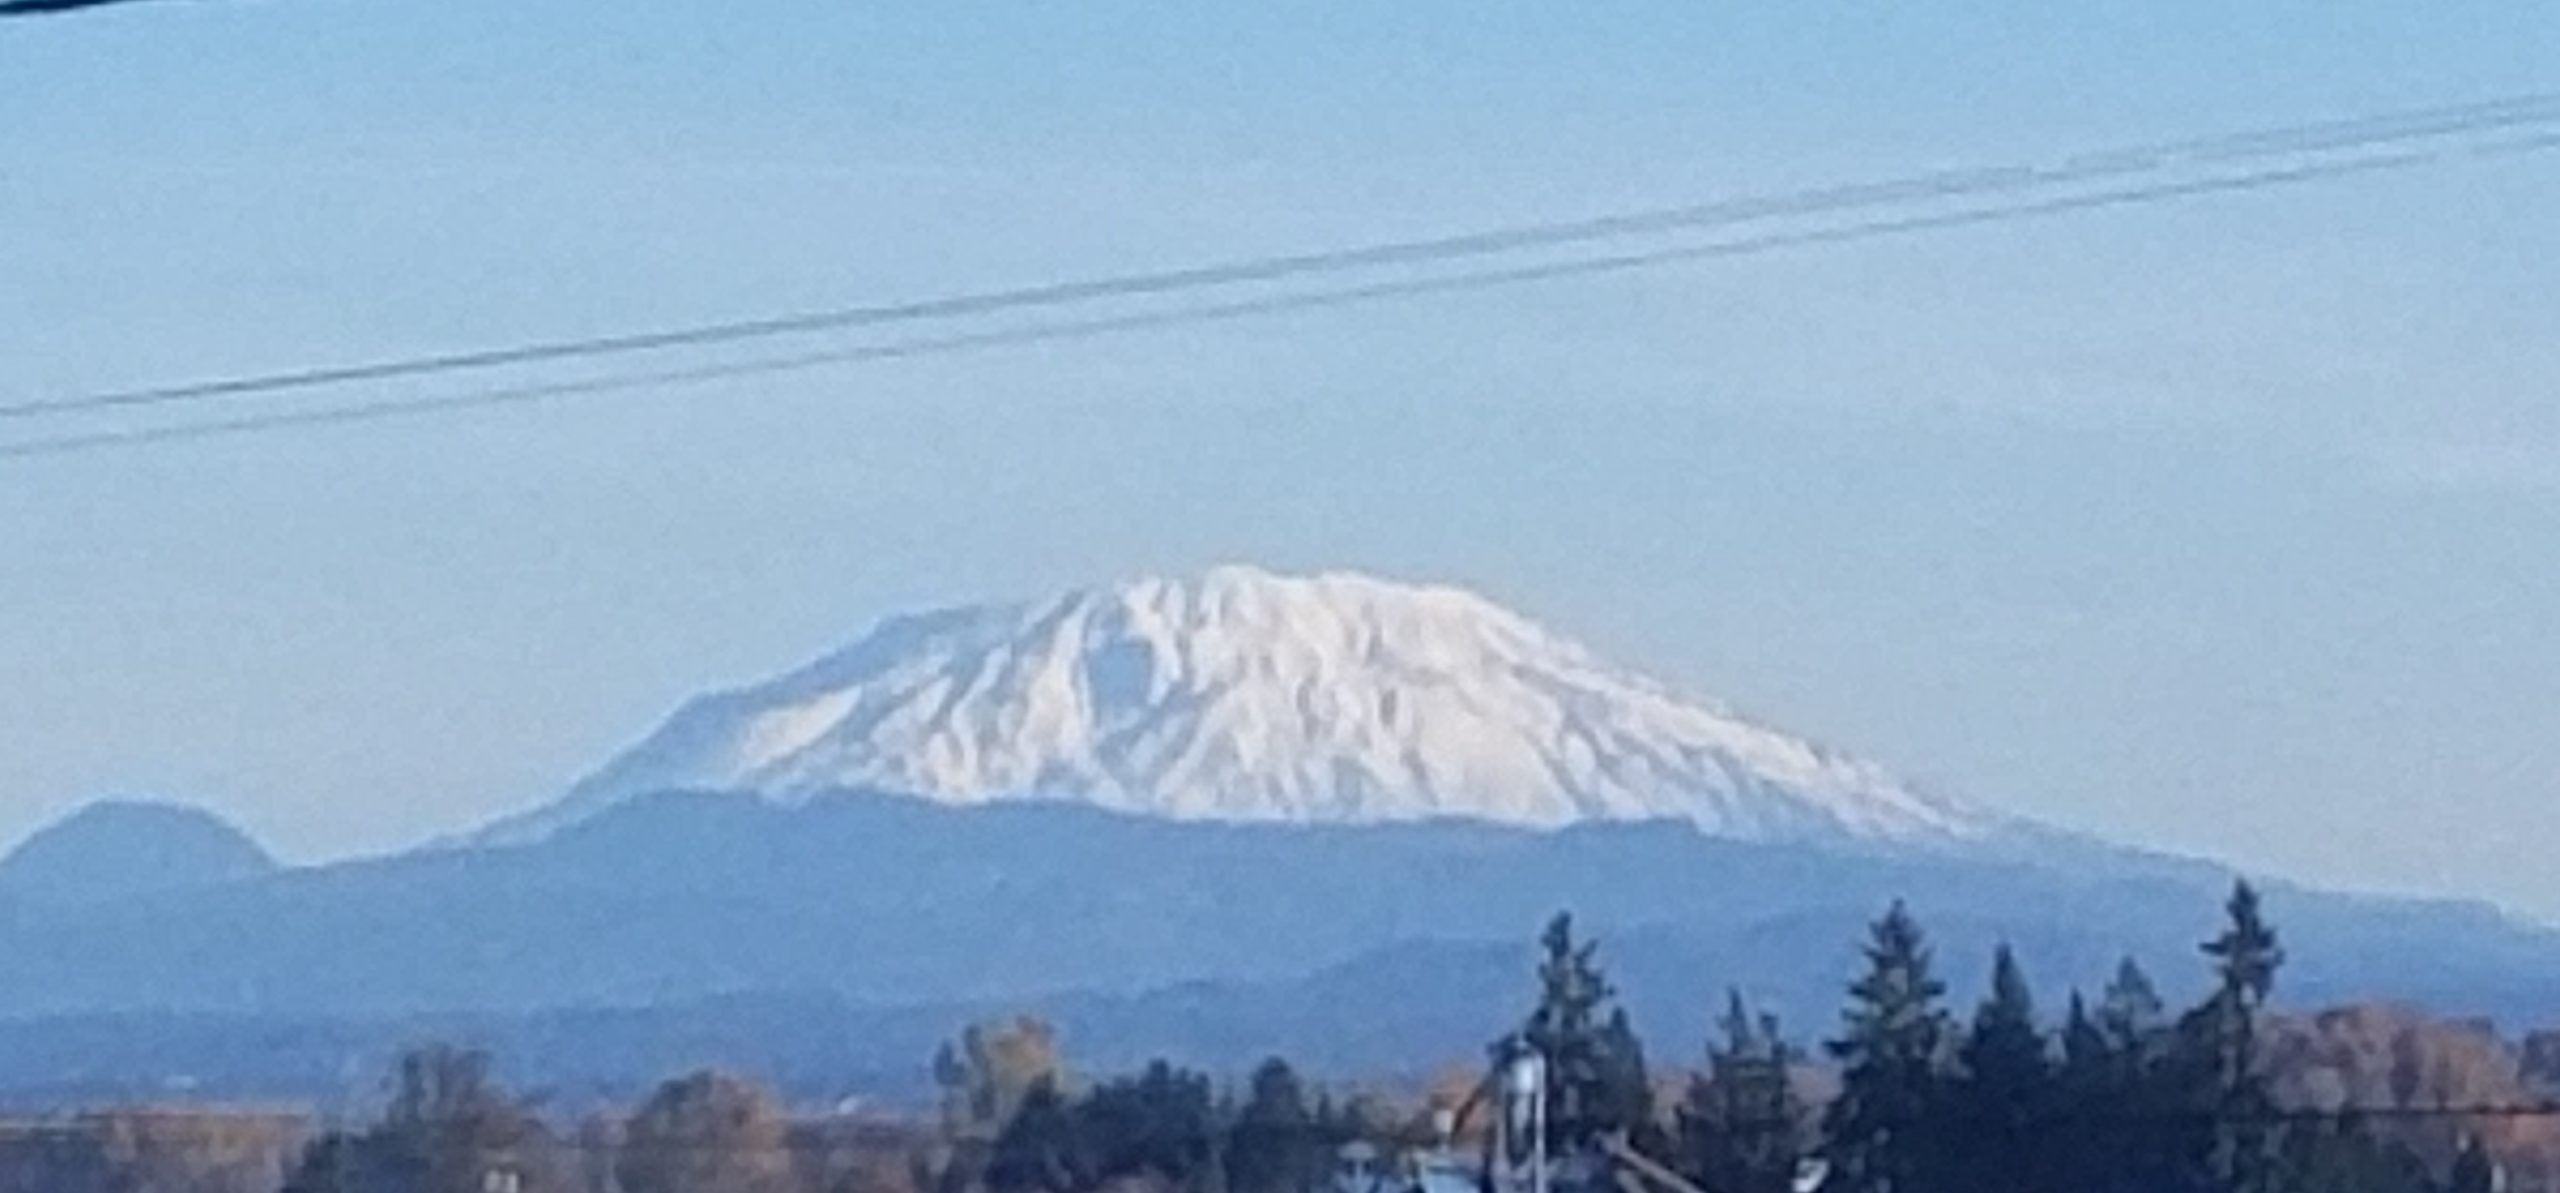 Mount St Helens today